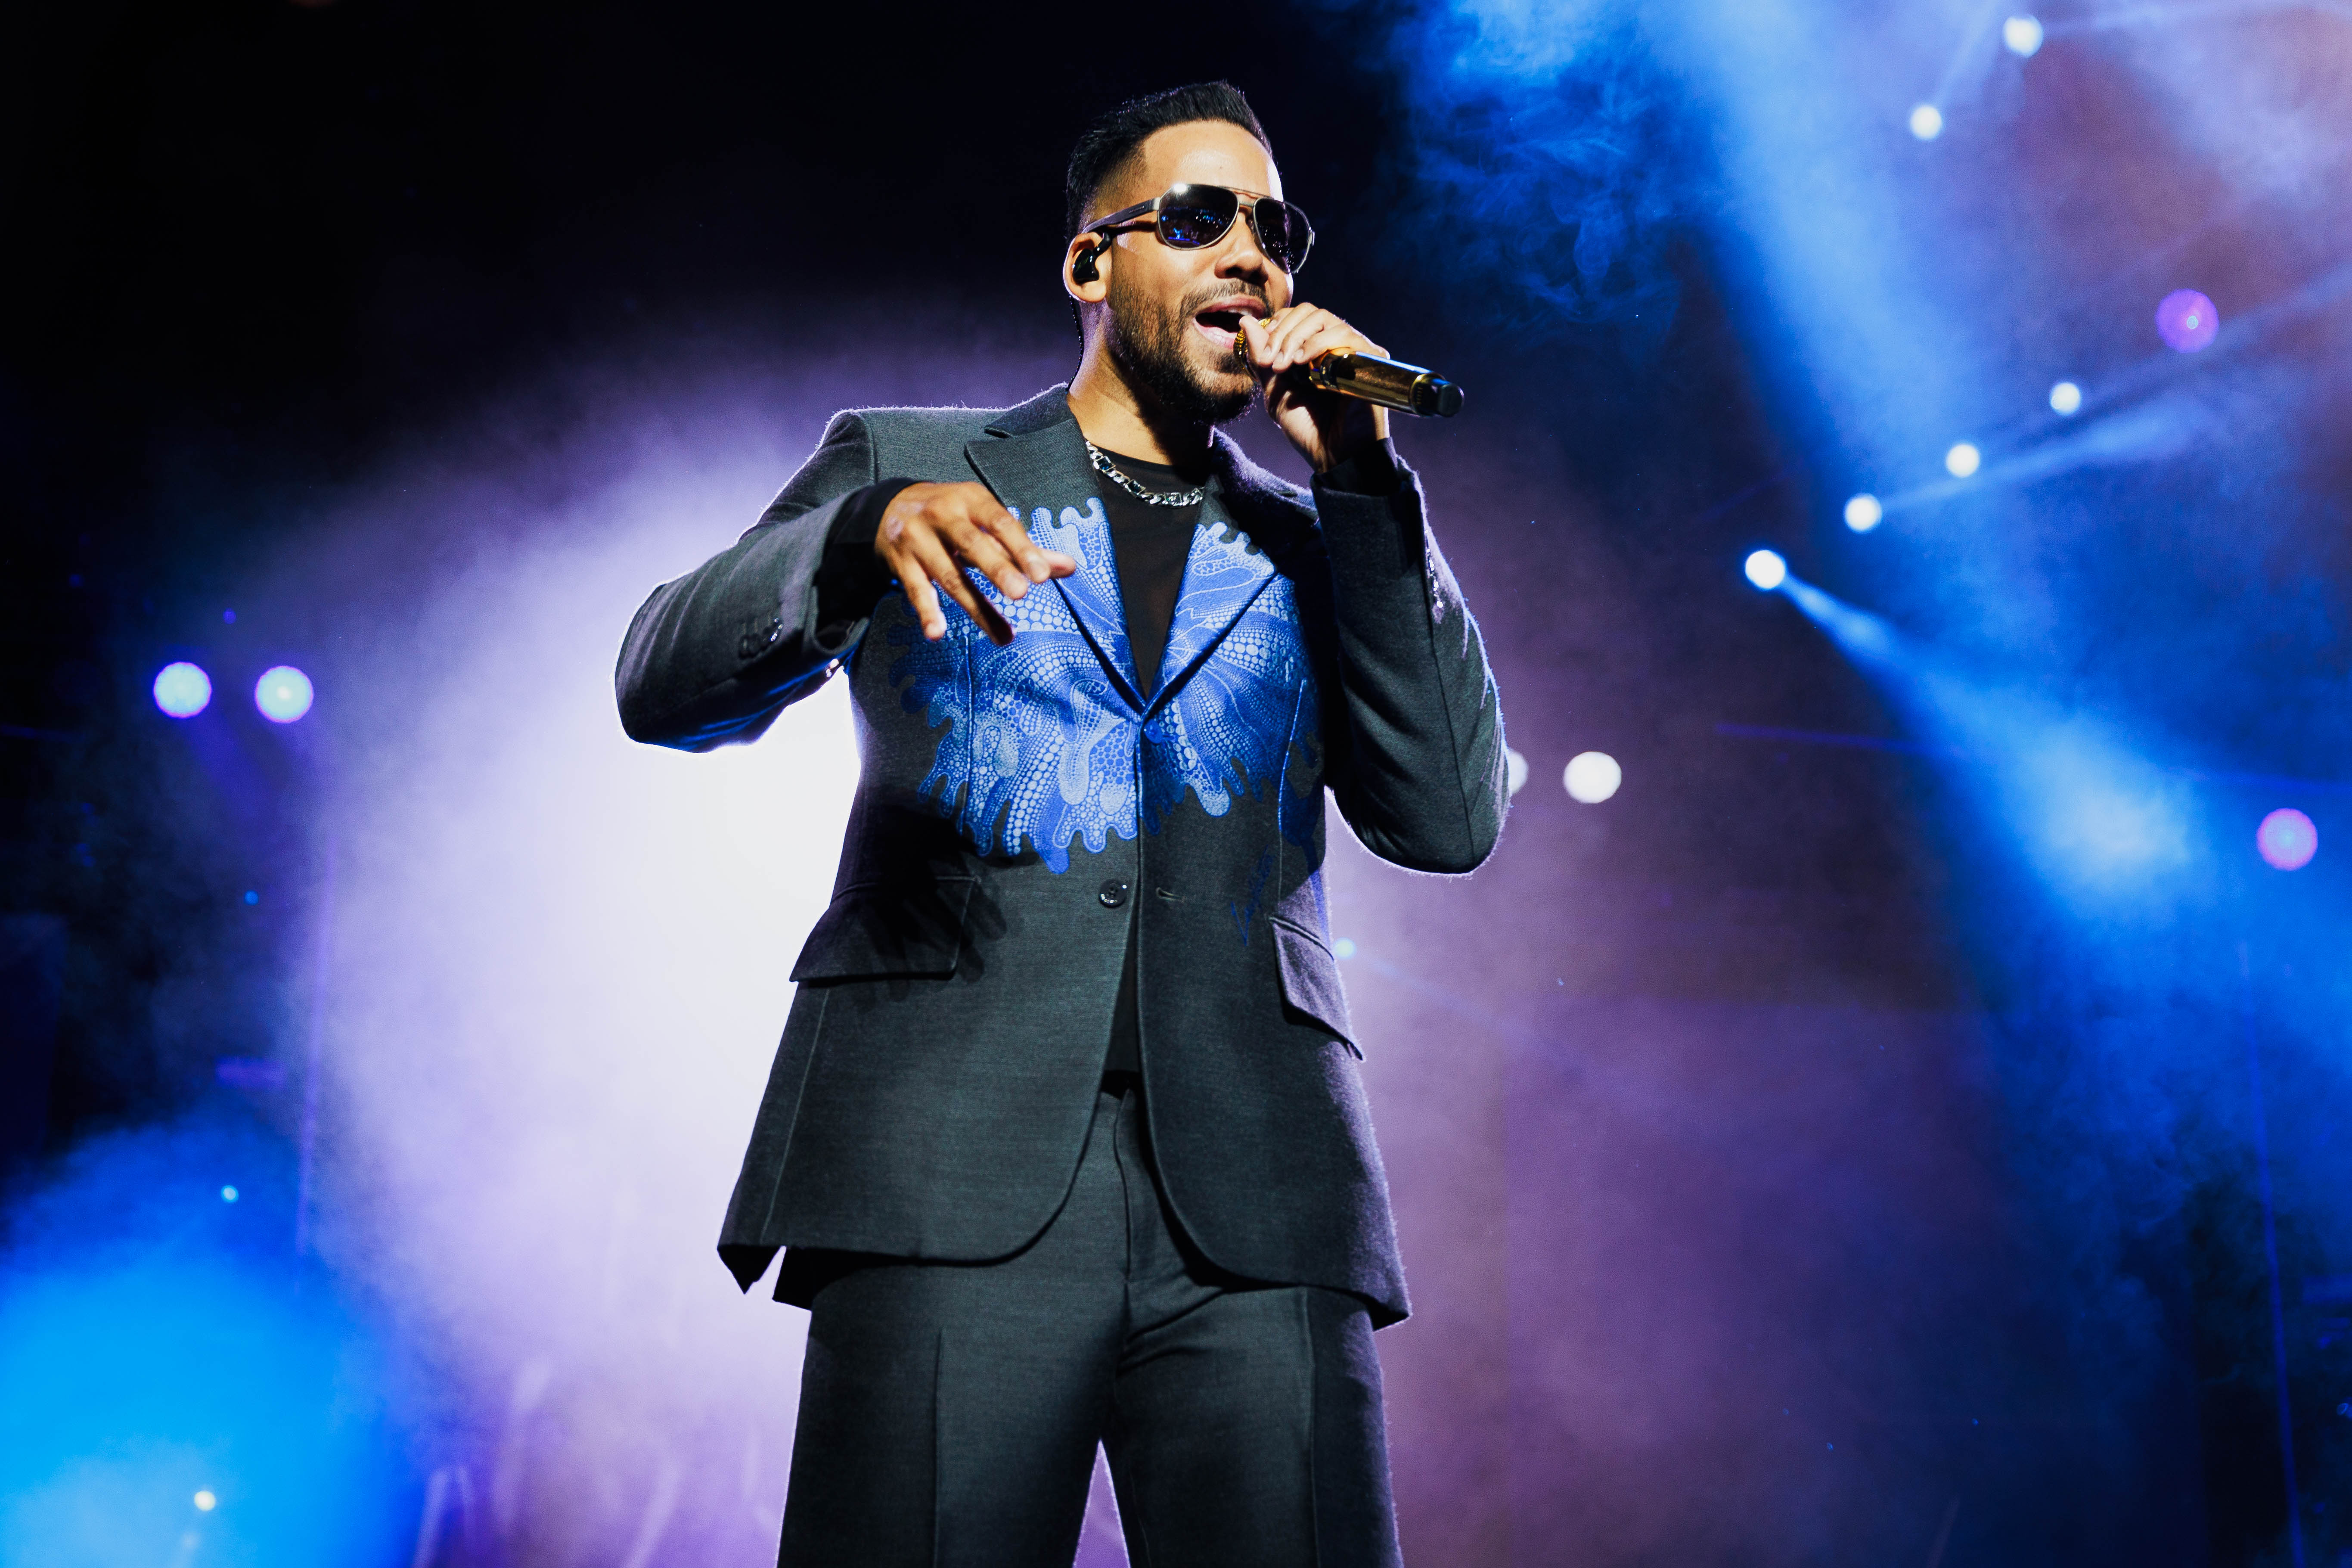 Romeo Santos performs onstage at WiZink Center during his "Formula Vol.3" tour on July 7, 2023, in Madrid, Spain. | Source: Getty Images